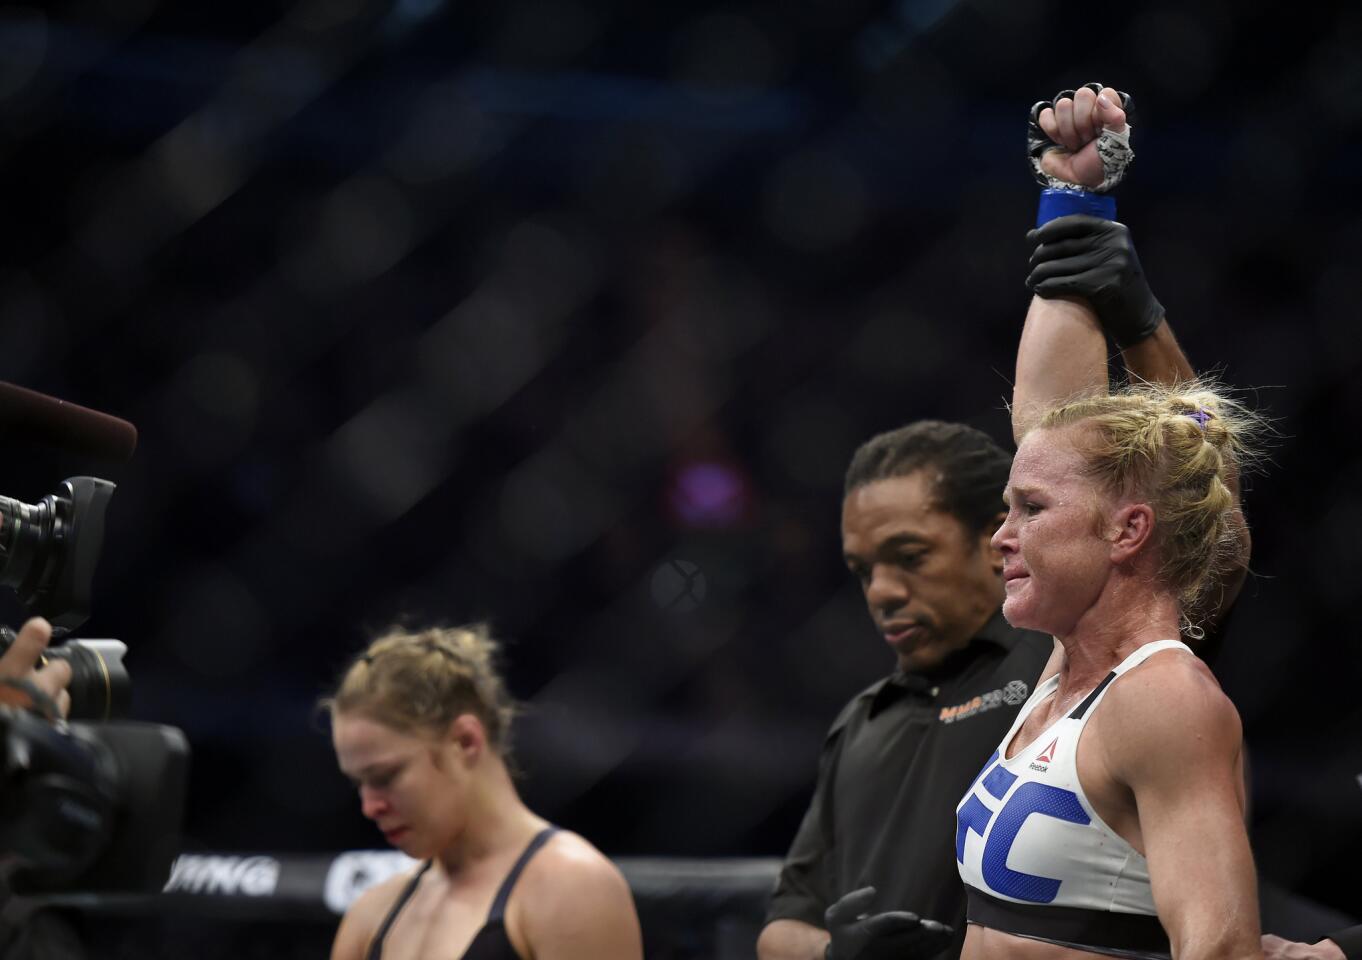 Holly Holm cashes in her life's work to shock Ronda Rousey